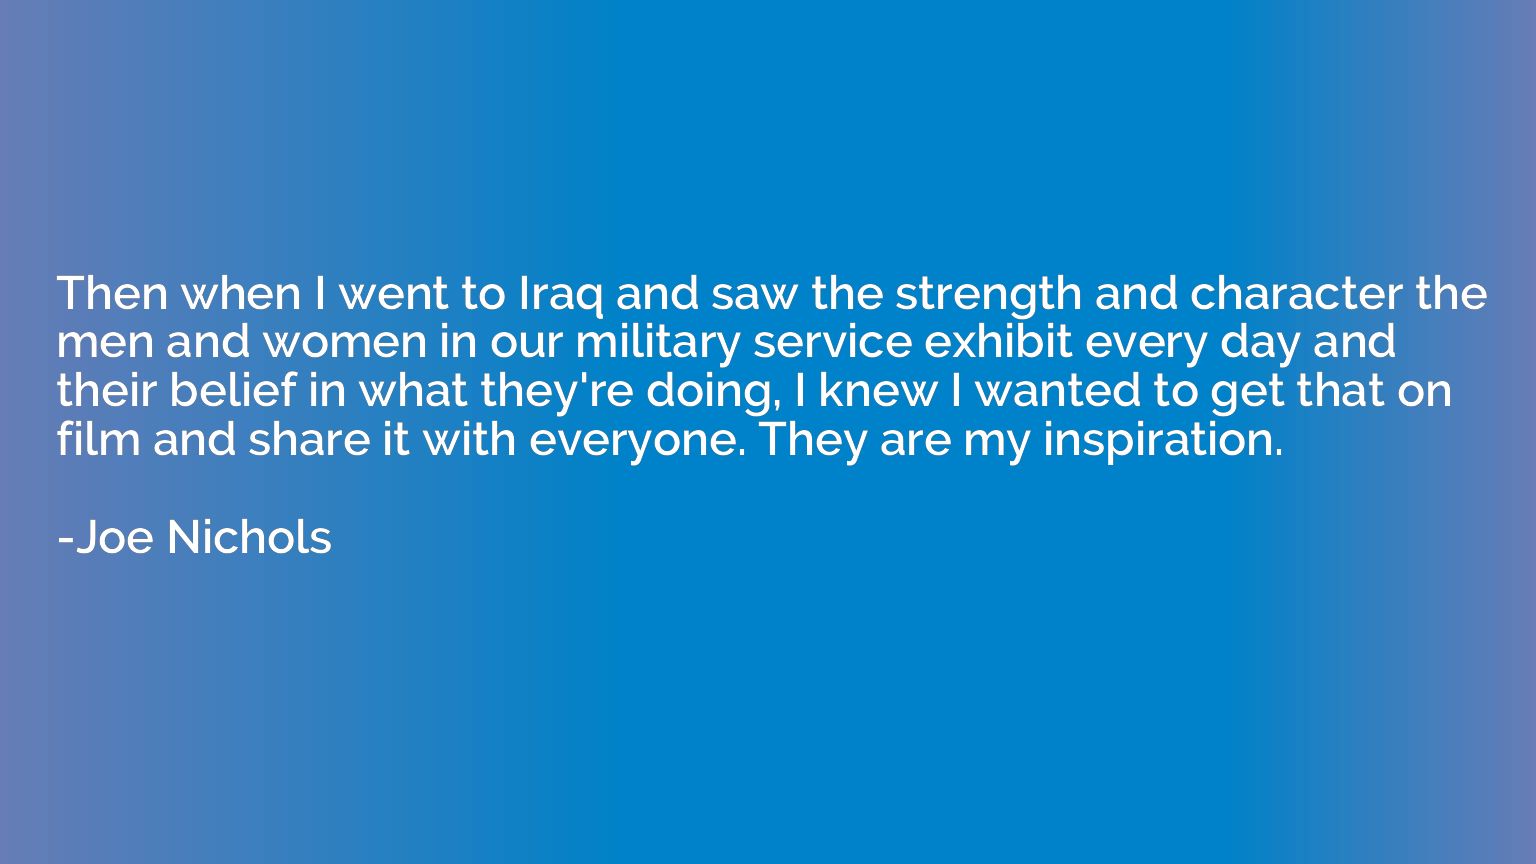 Then when I went to Iraq and saw the strength and character 